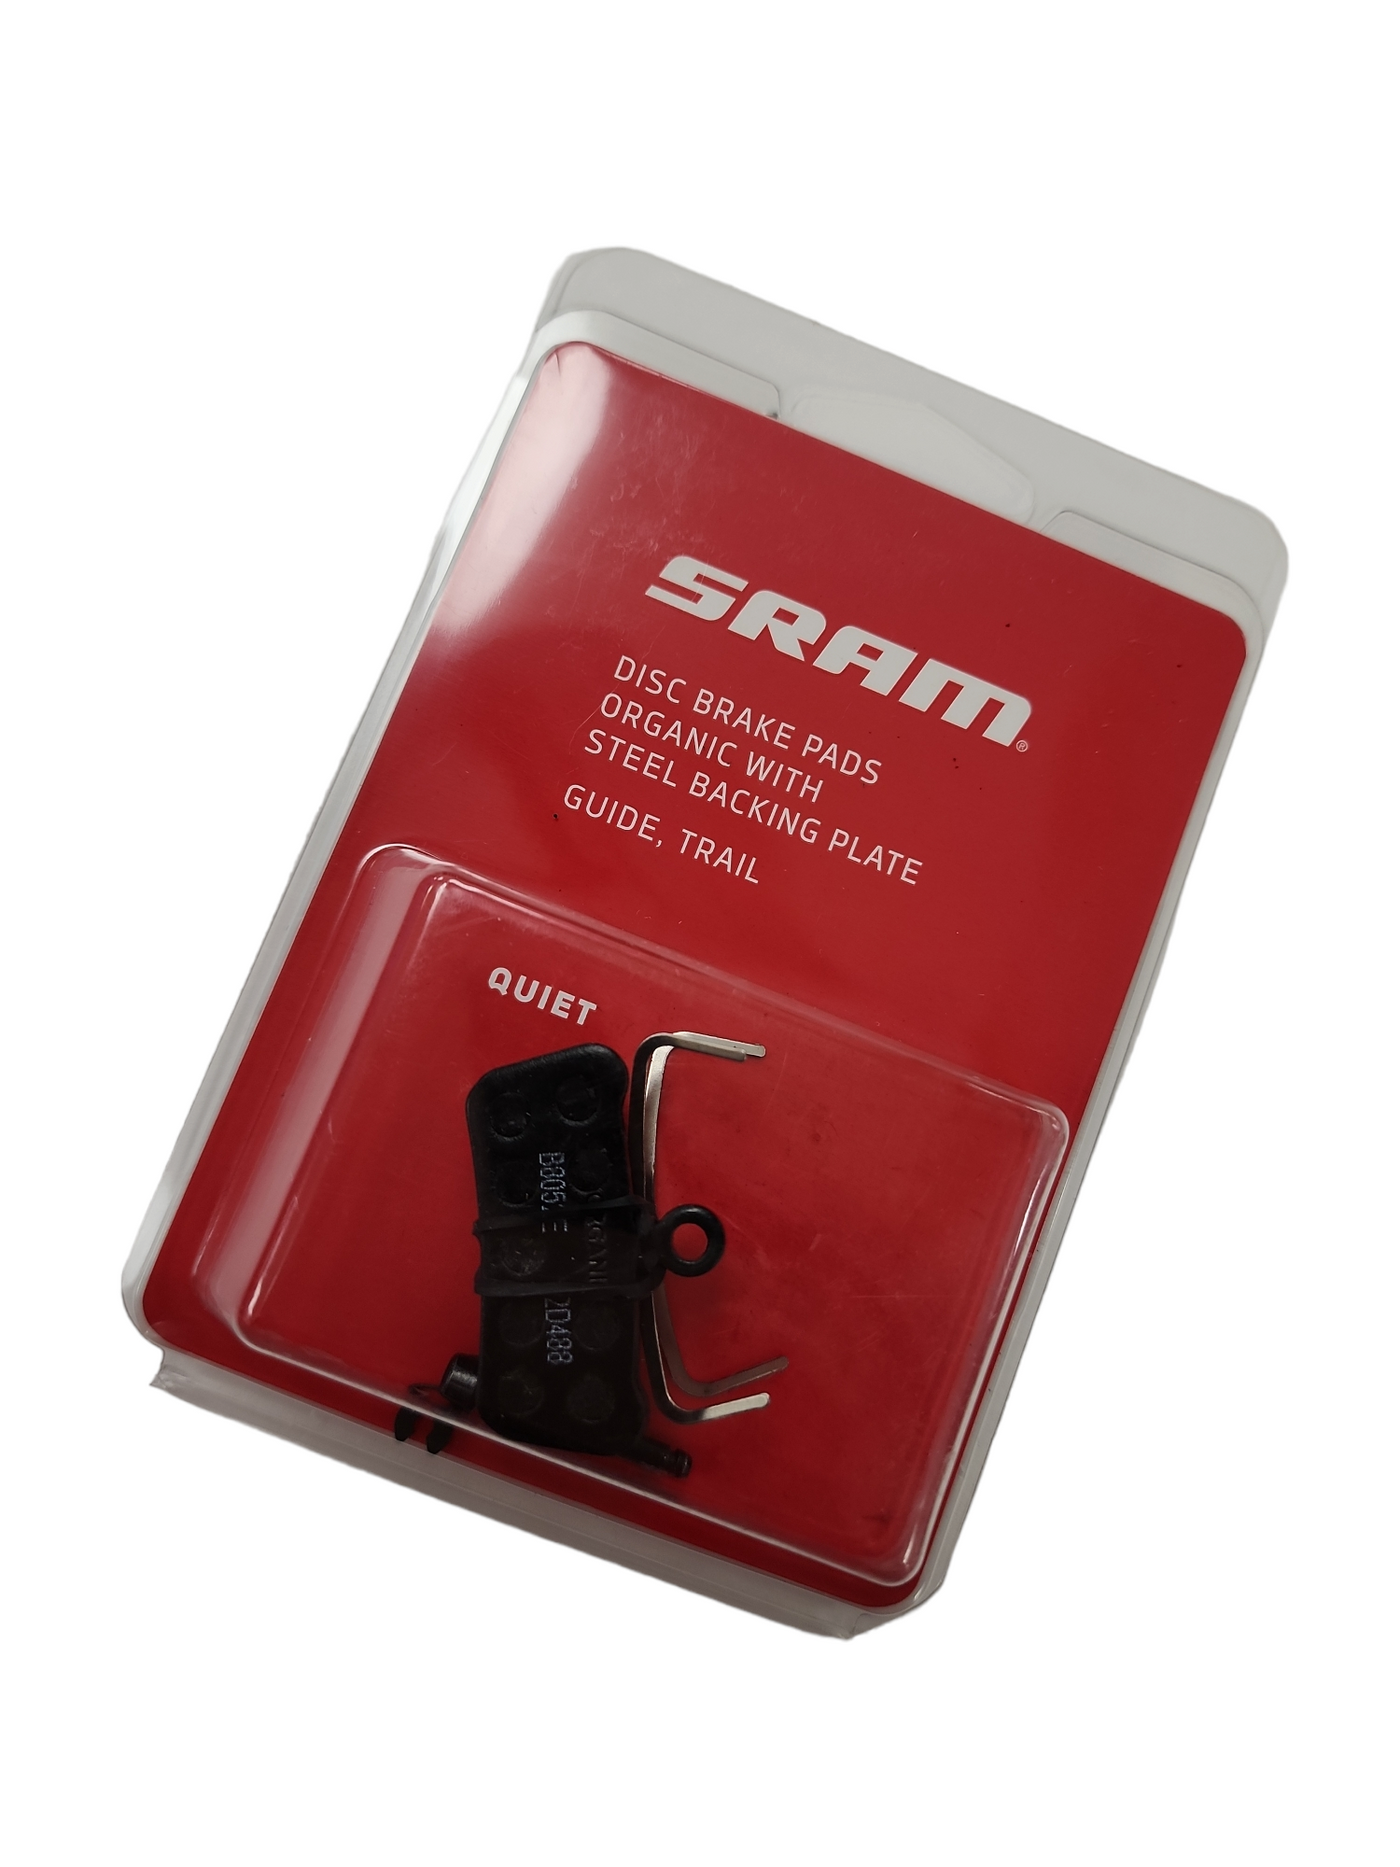 SRAM G2 Organic with steel backing plate